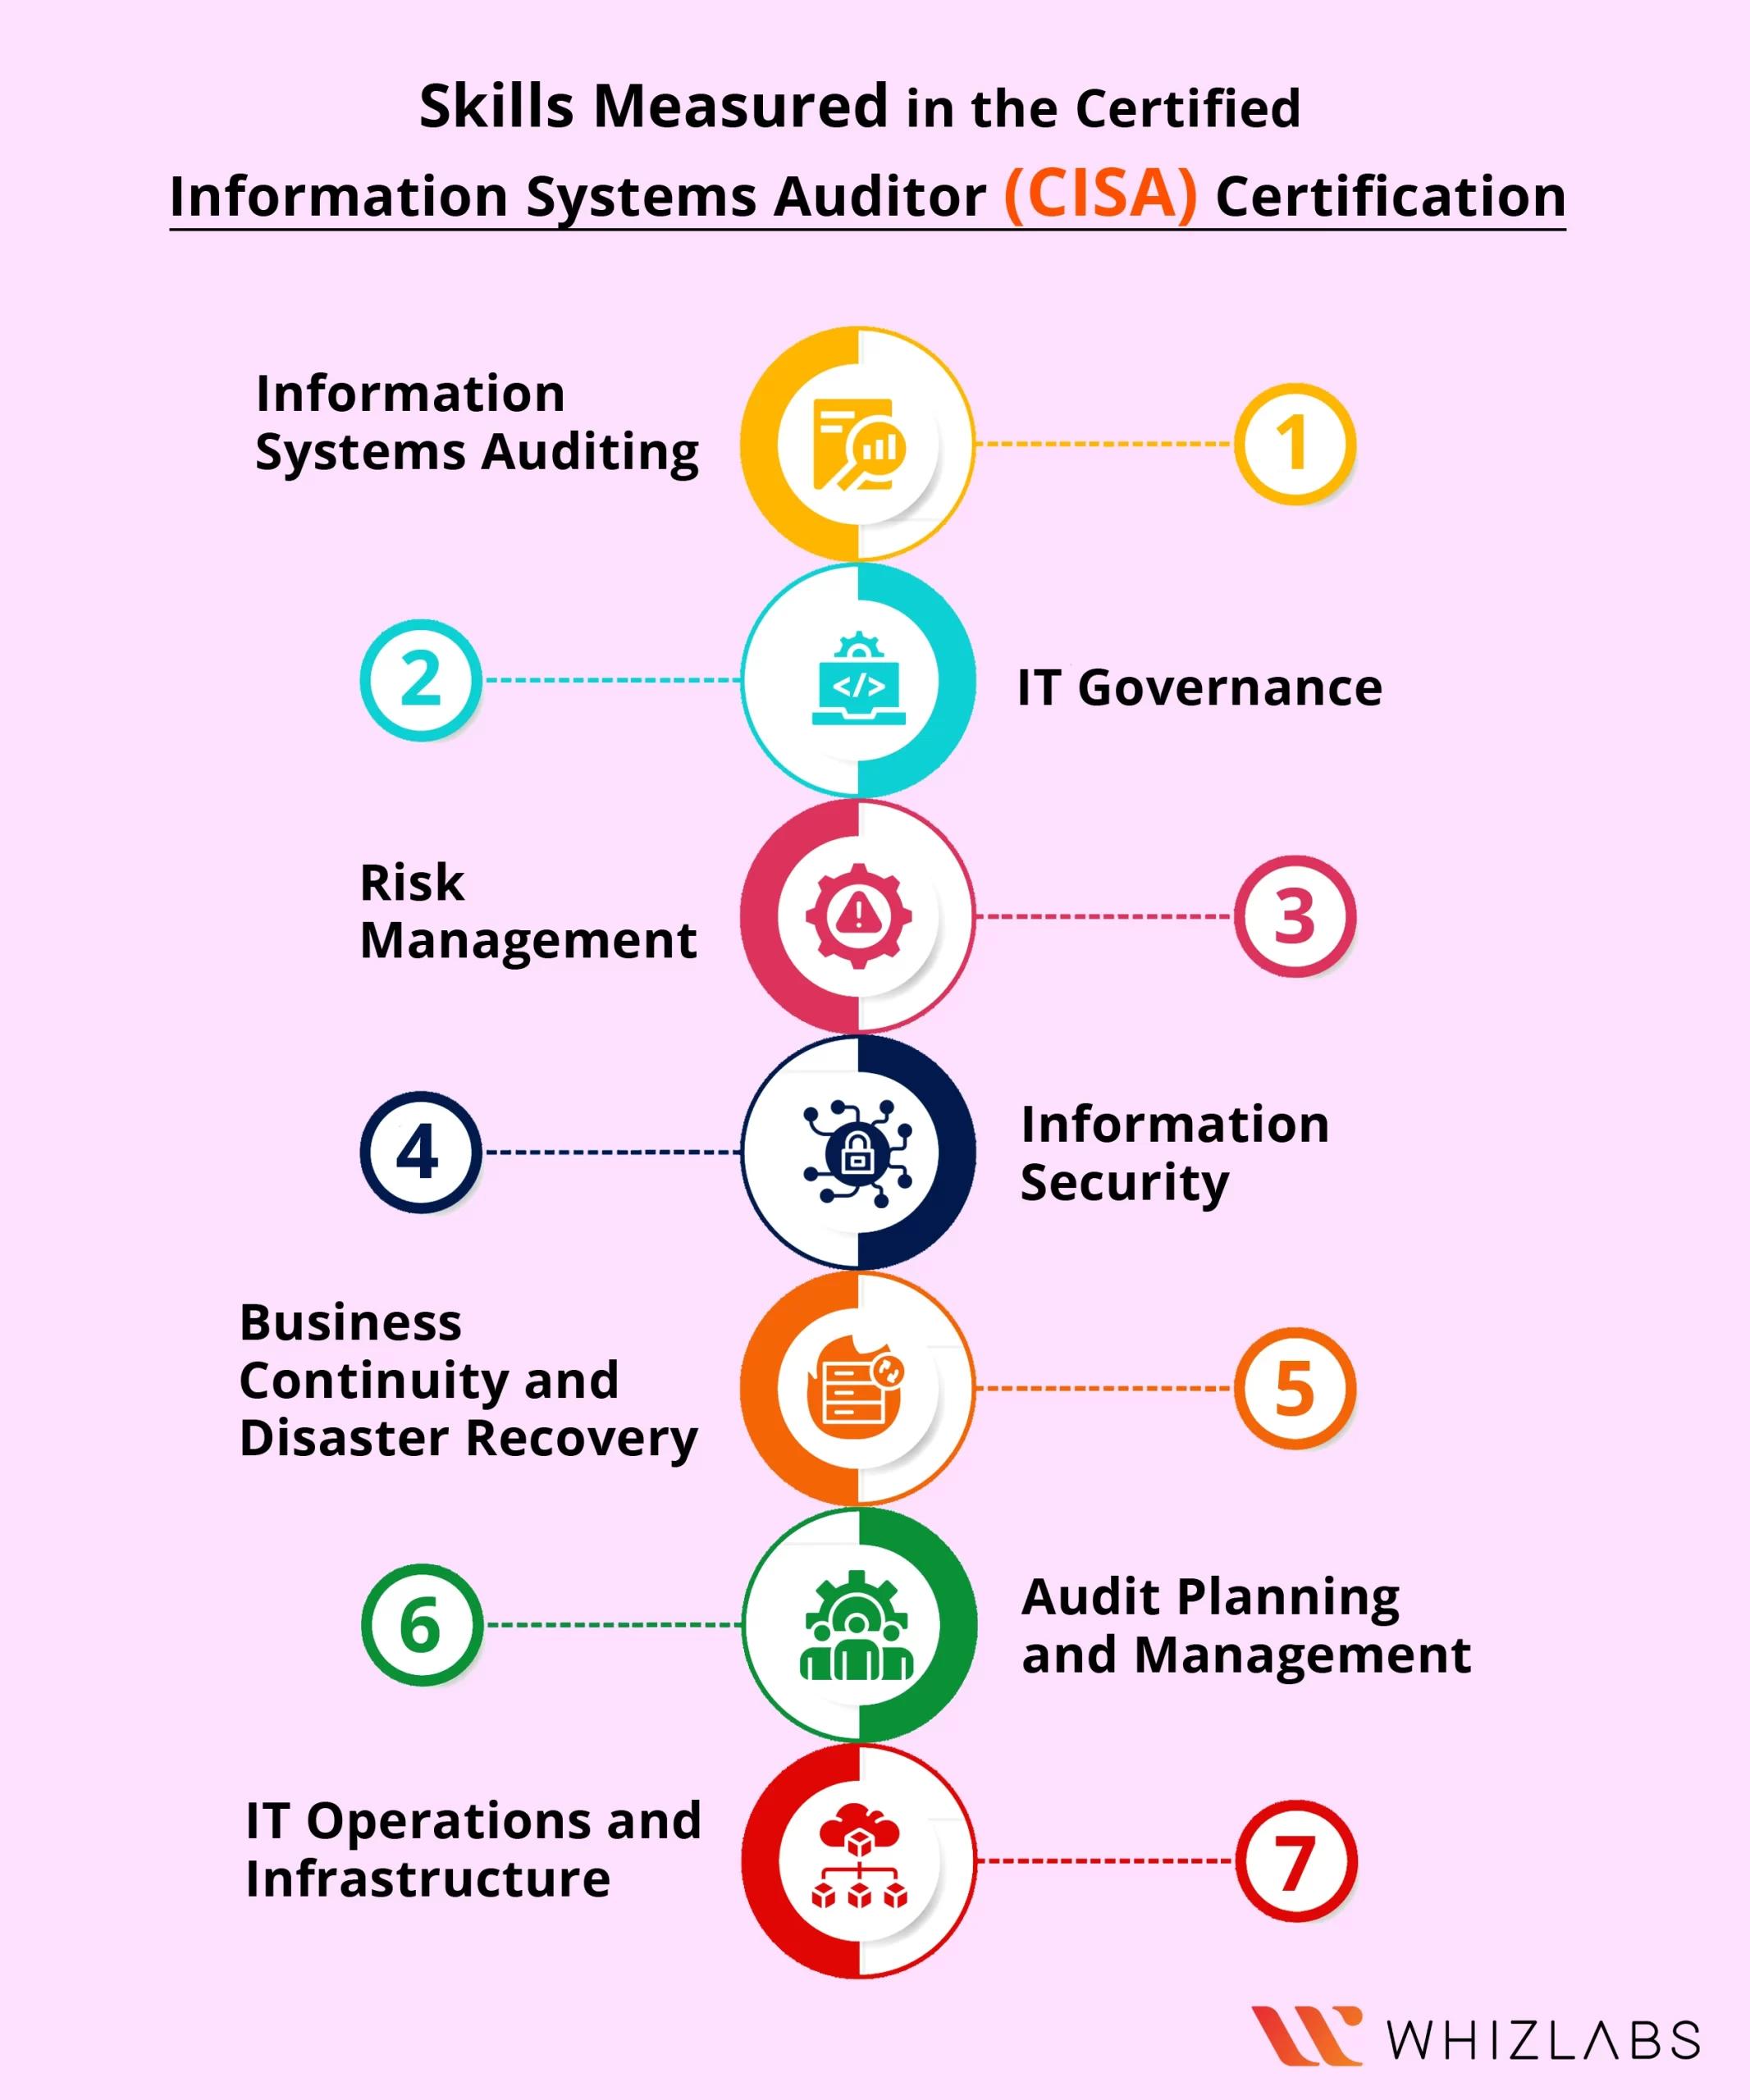 information systems auditor training - Is CISA training free